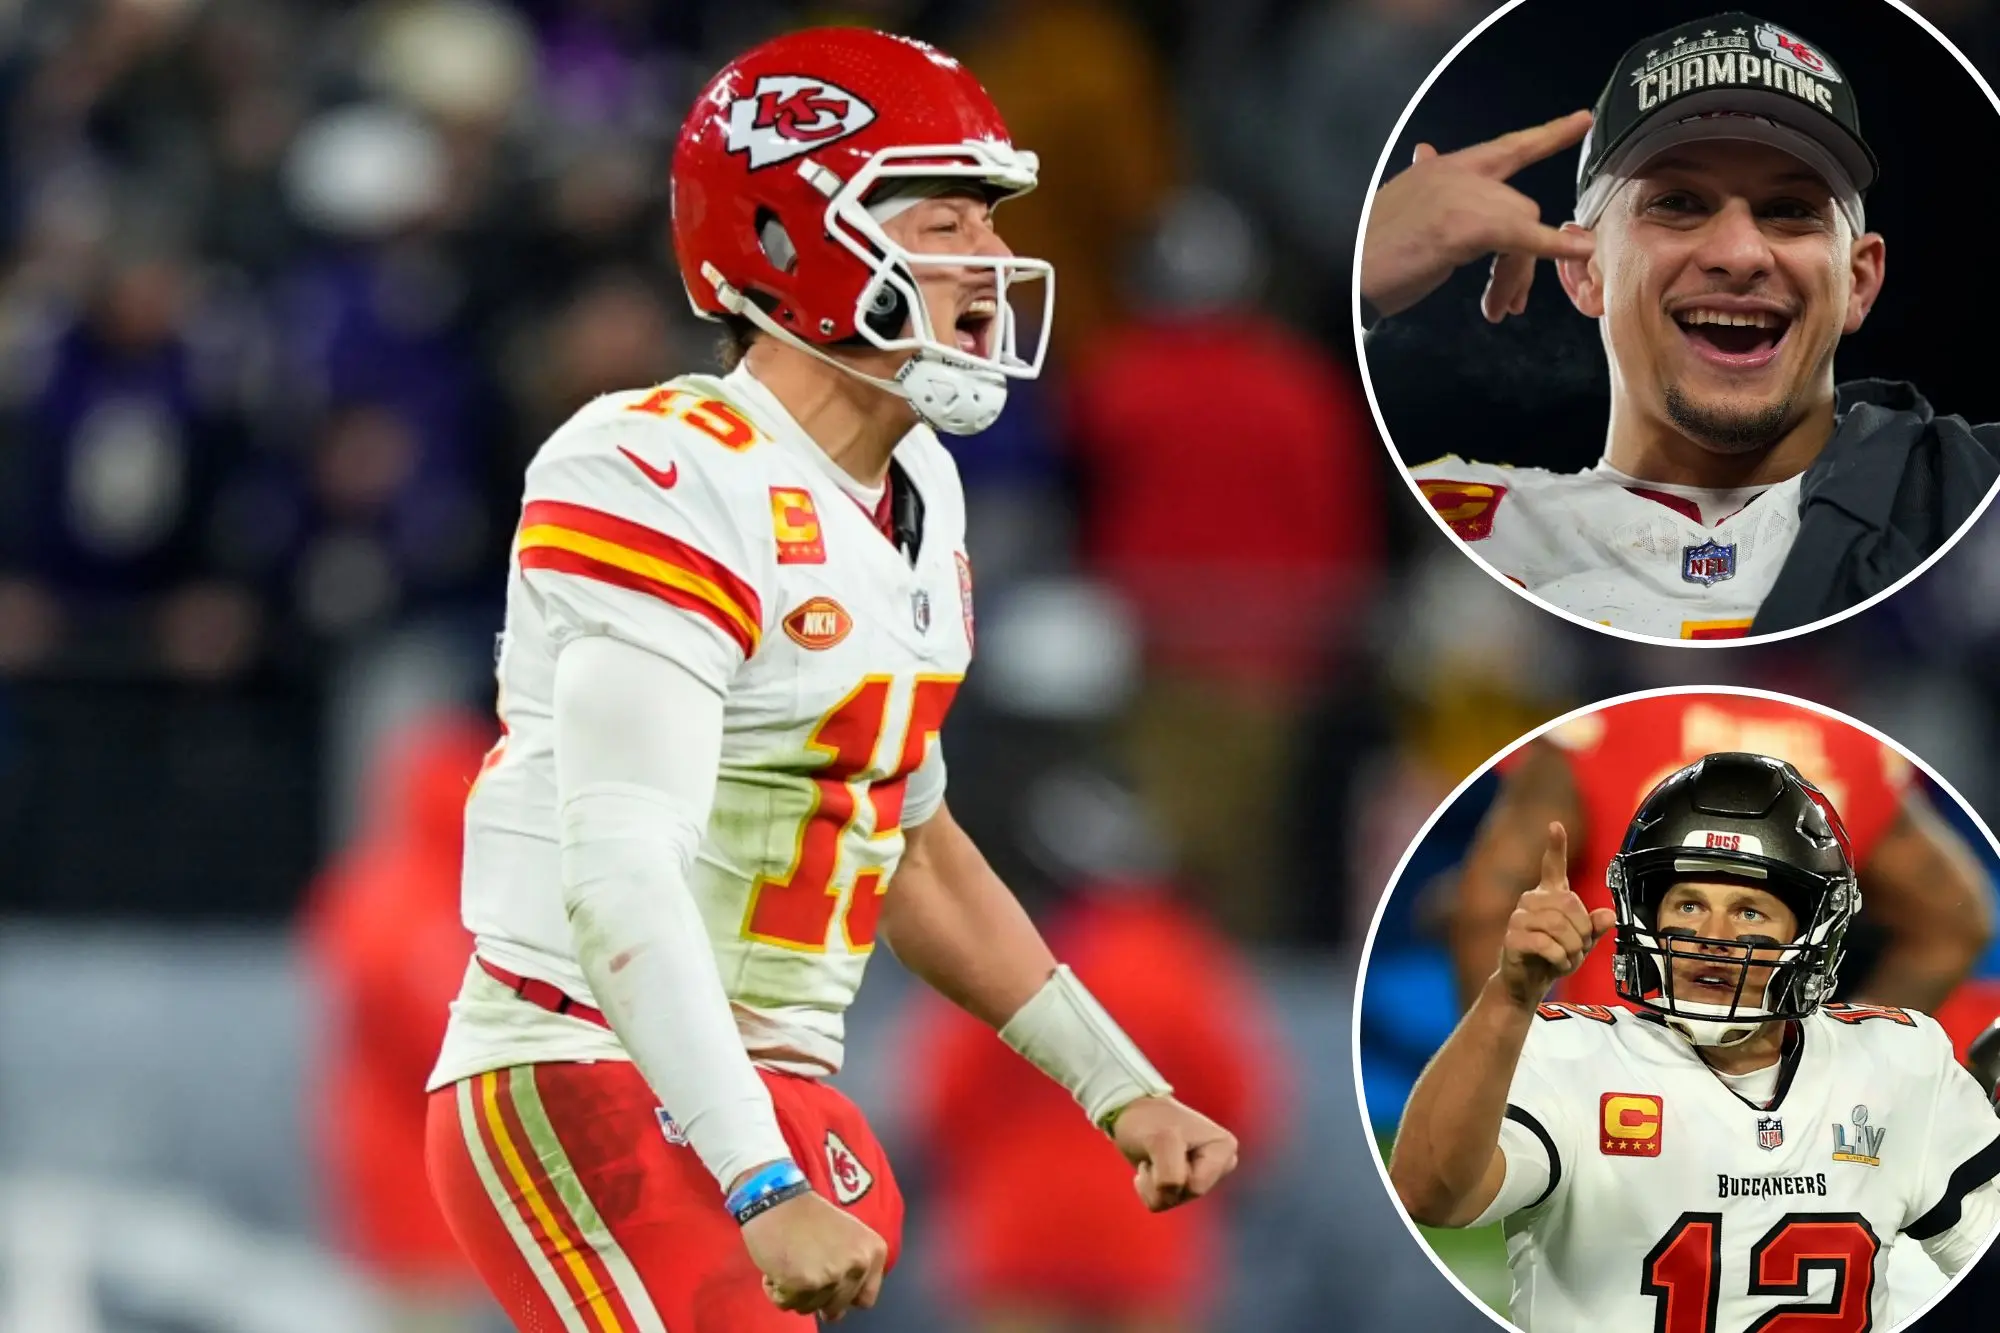 REVAELED: Tom Brady's message to Patrick Mahomes left him heart broken and destroys any hope of a Chiefs win